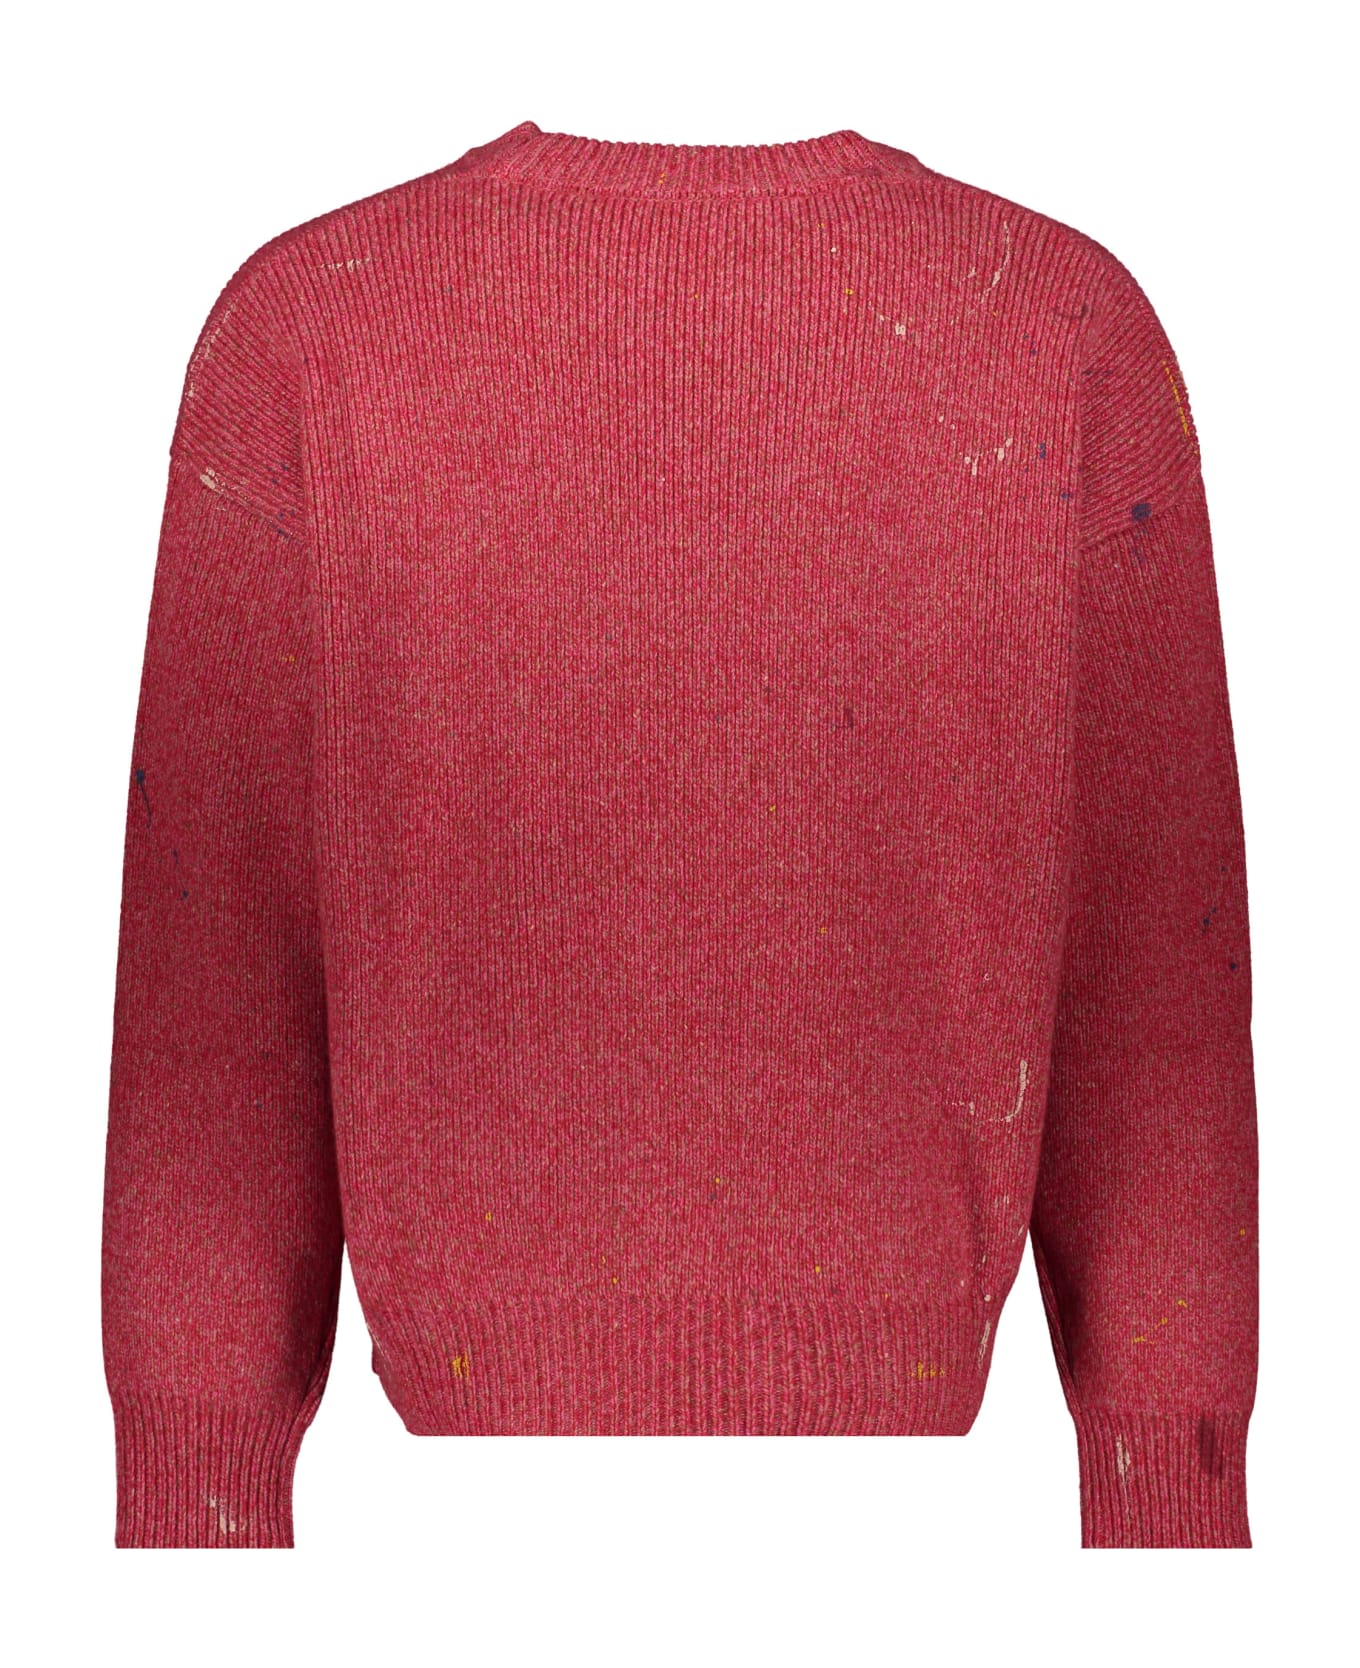 Palm Angels Long Sleeve Crew-neck Sweater - red ニットウェア